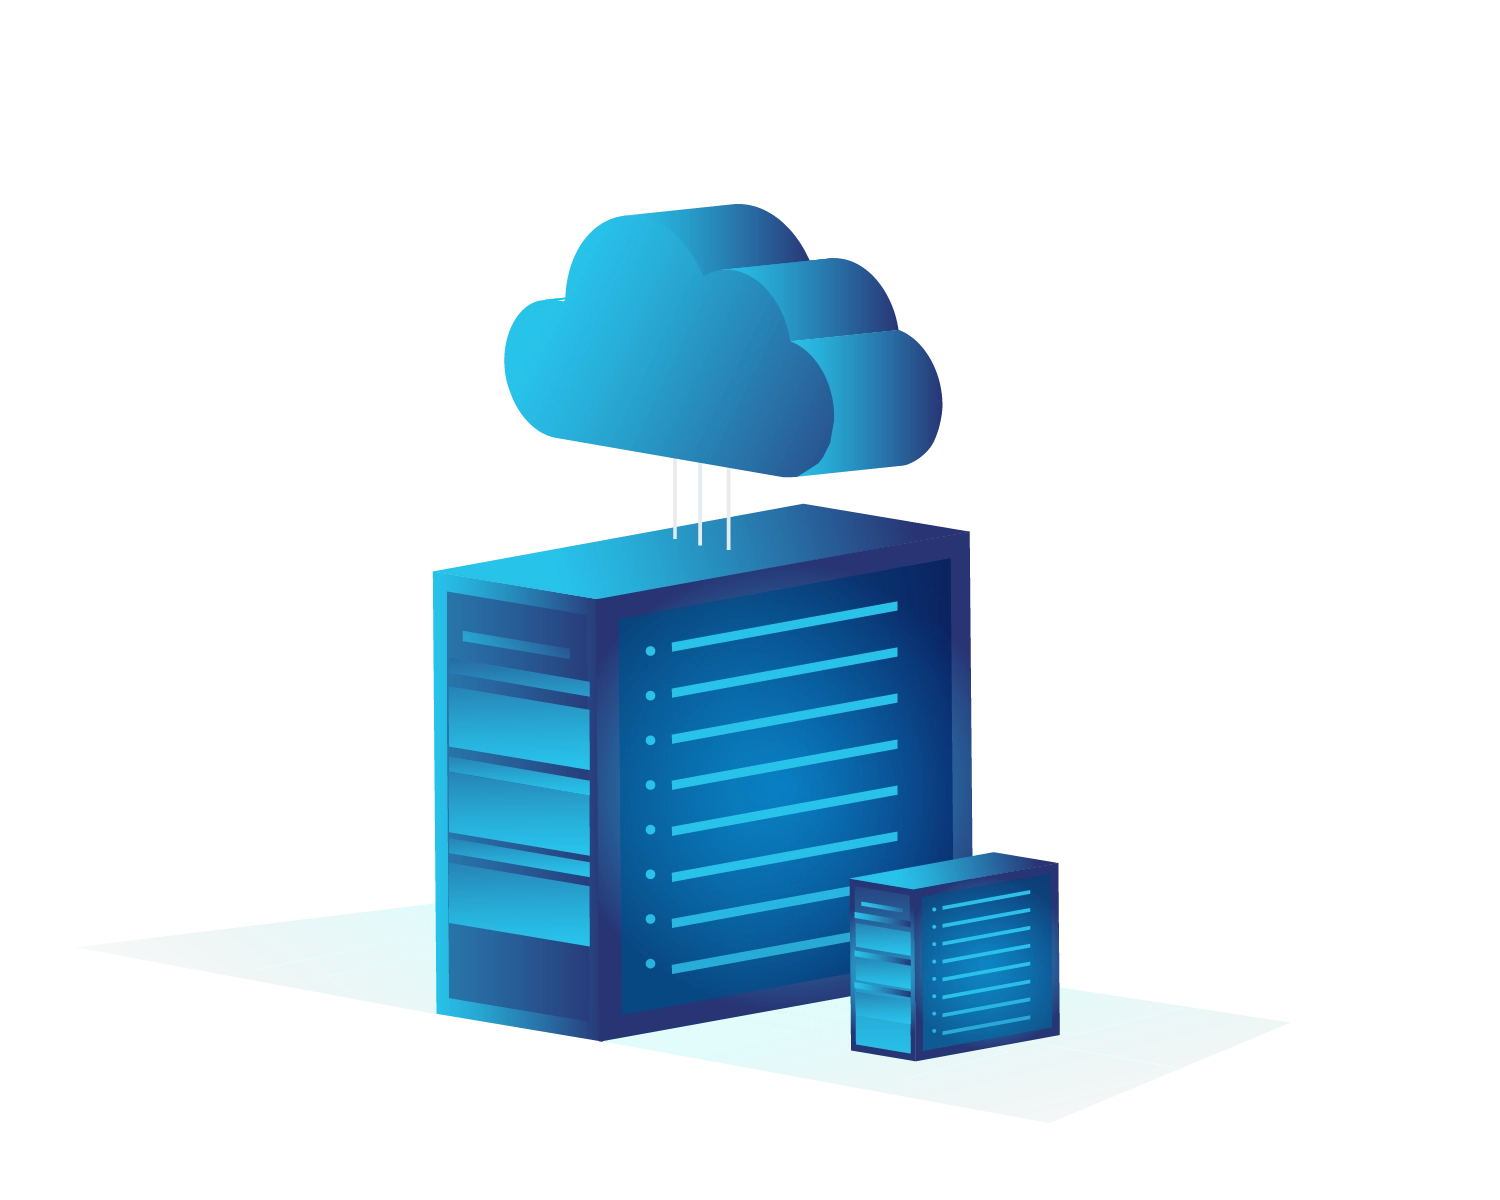 Get a quote or a free consultation for Microsoft Azure Stack